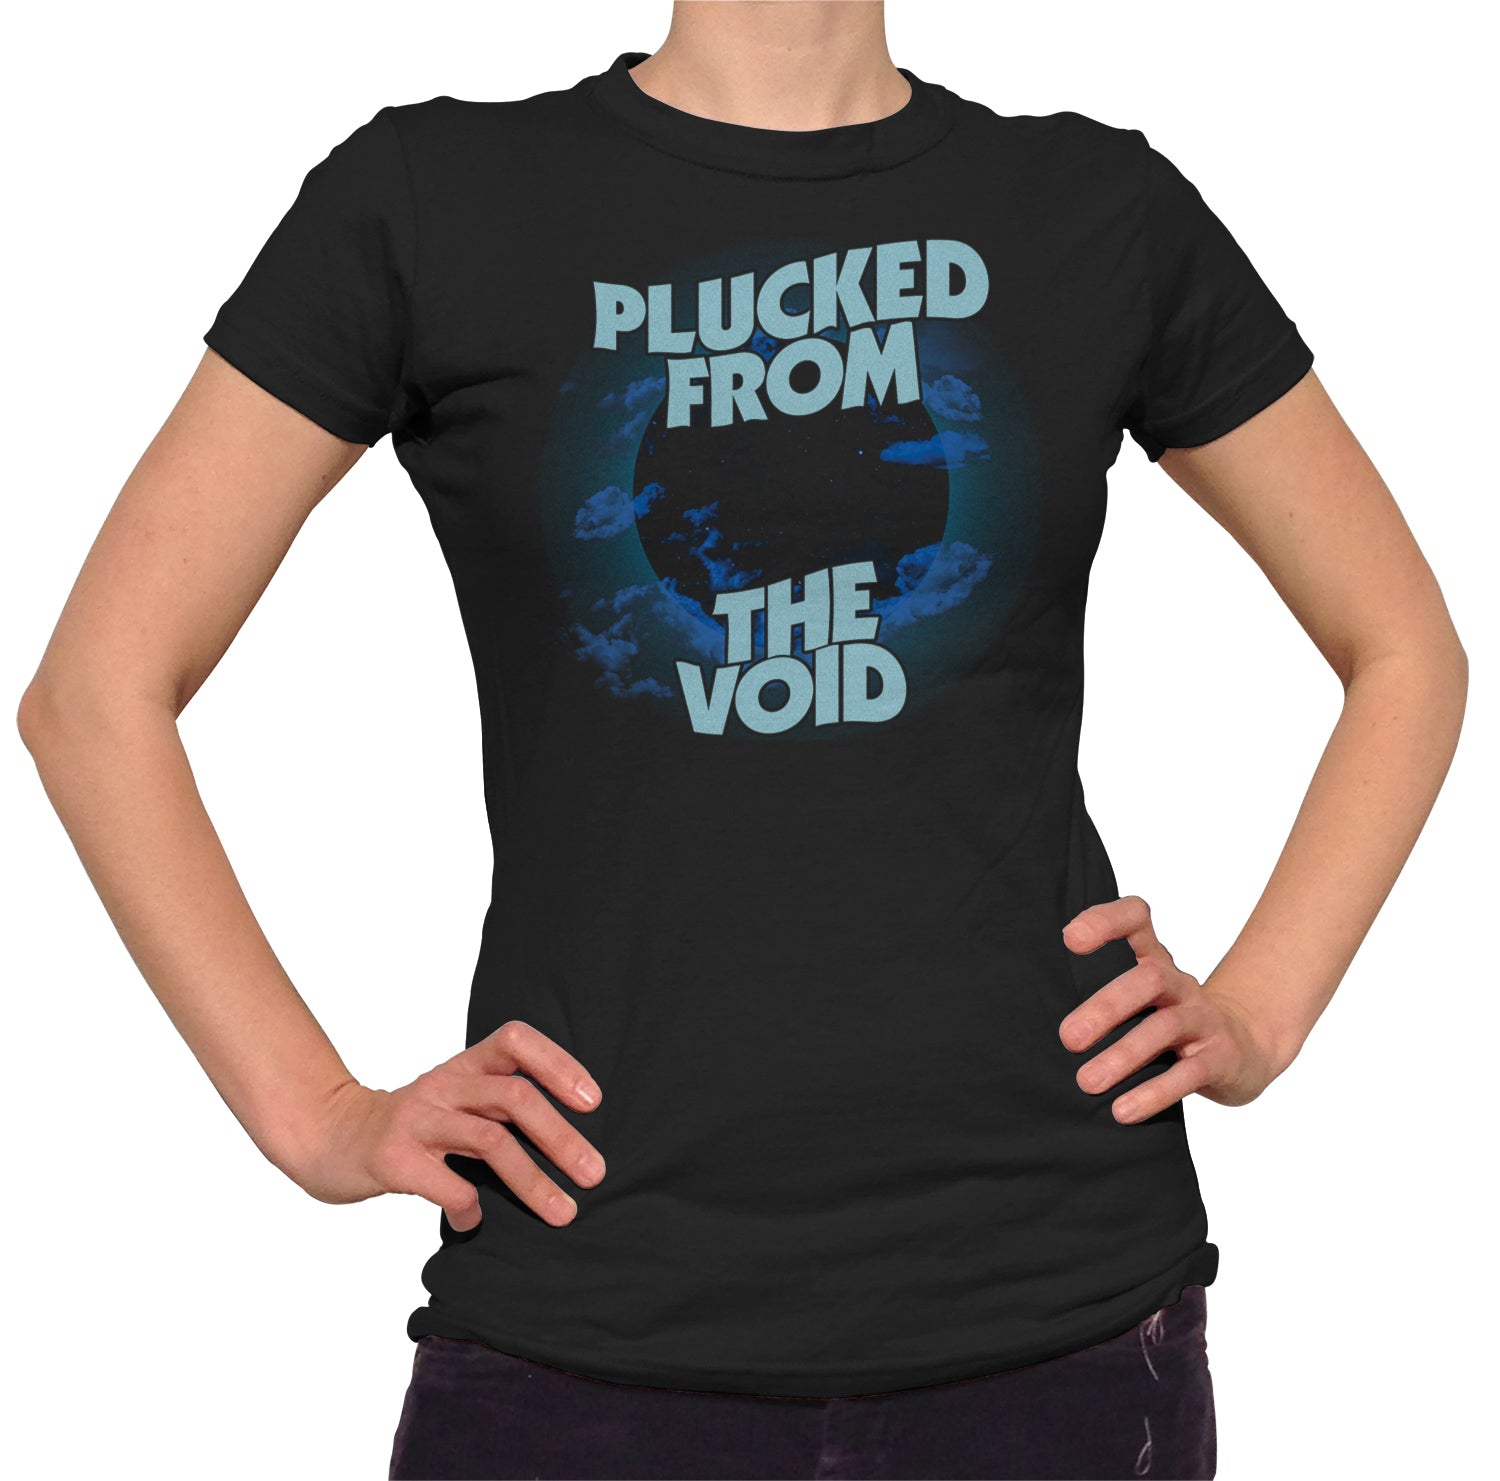 Women's Plucked From the Void T-Shirt